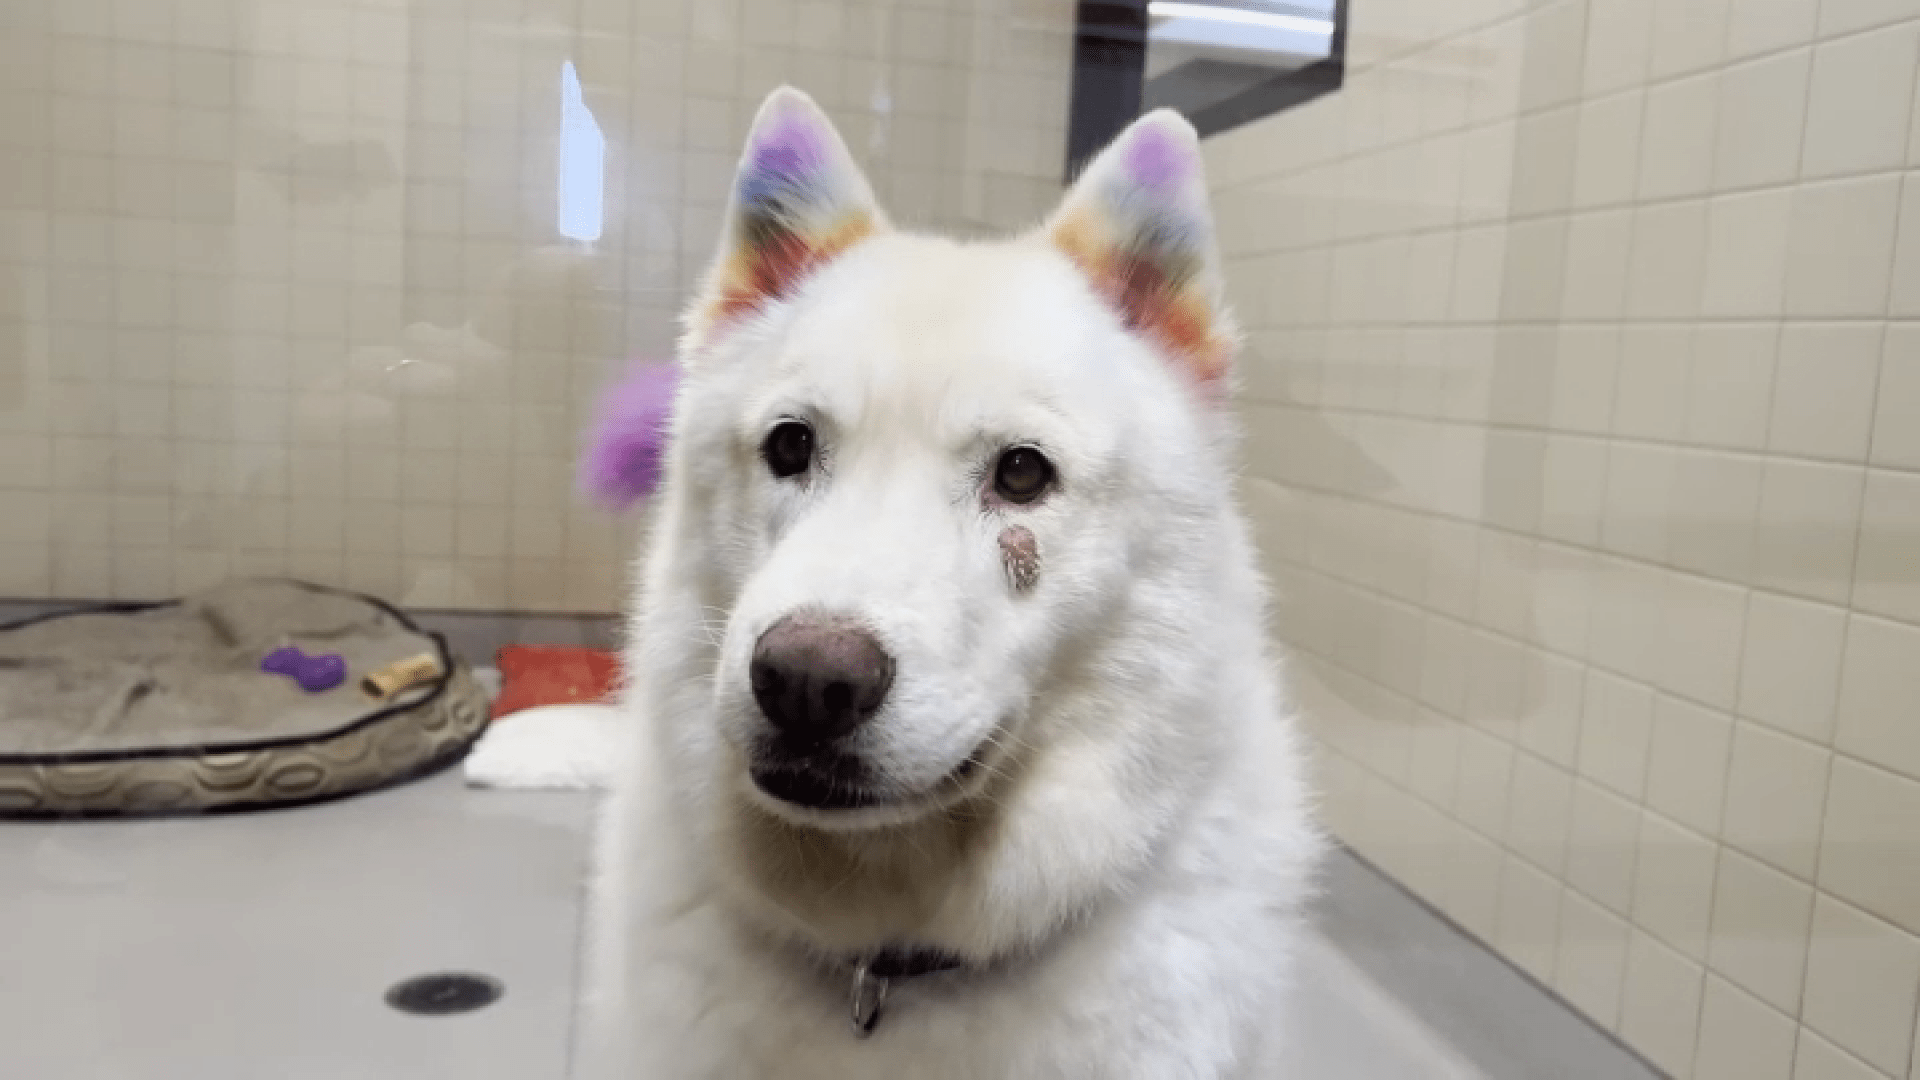 Gabriel Feitosa is a dog groomer who gives specialized treatments to dogs at the San Diego Humane Society to help them find their forever homes.